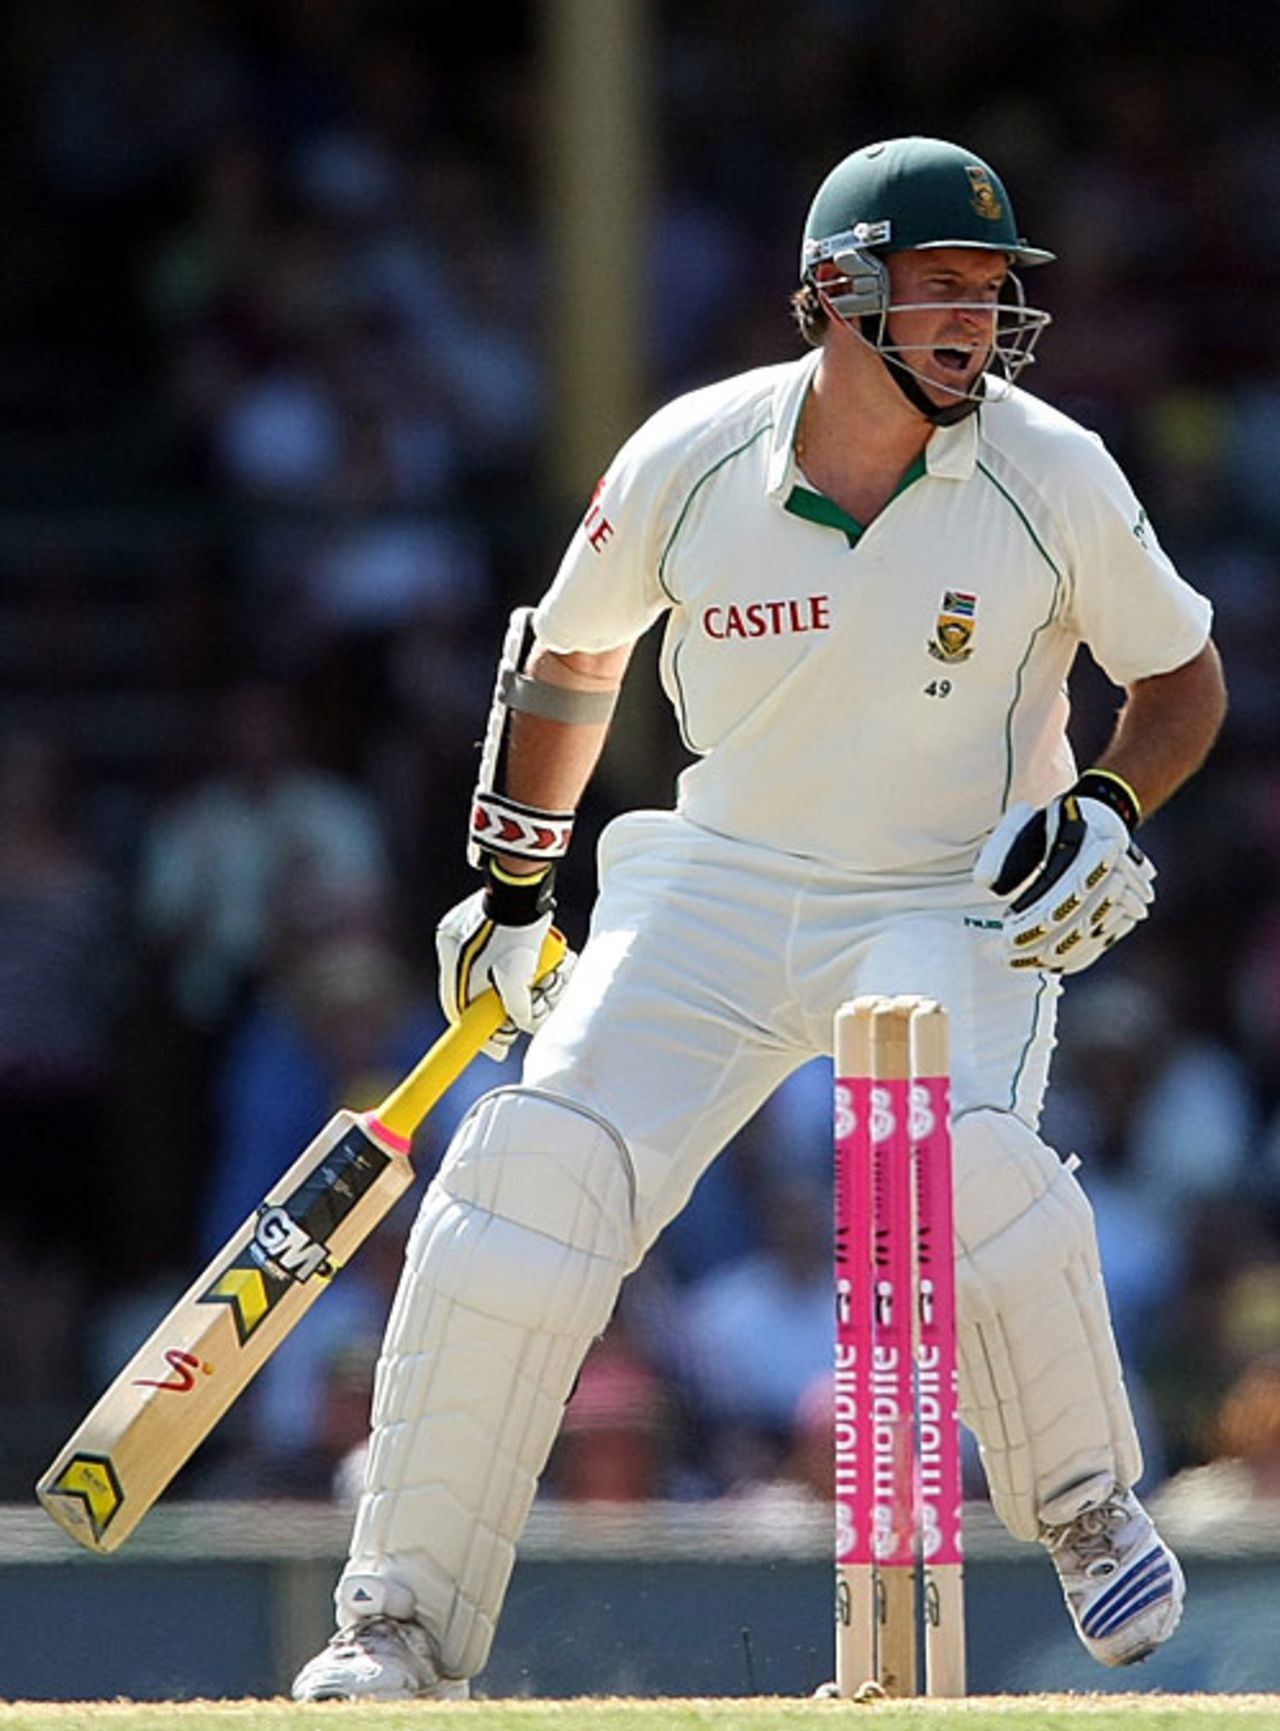 Graeme Smith reacts after being hit on his left arm, Australia v South Africa, 3rd Test, 2nd day, Sydney, January 4, 2009